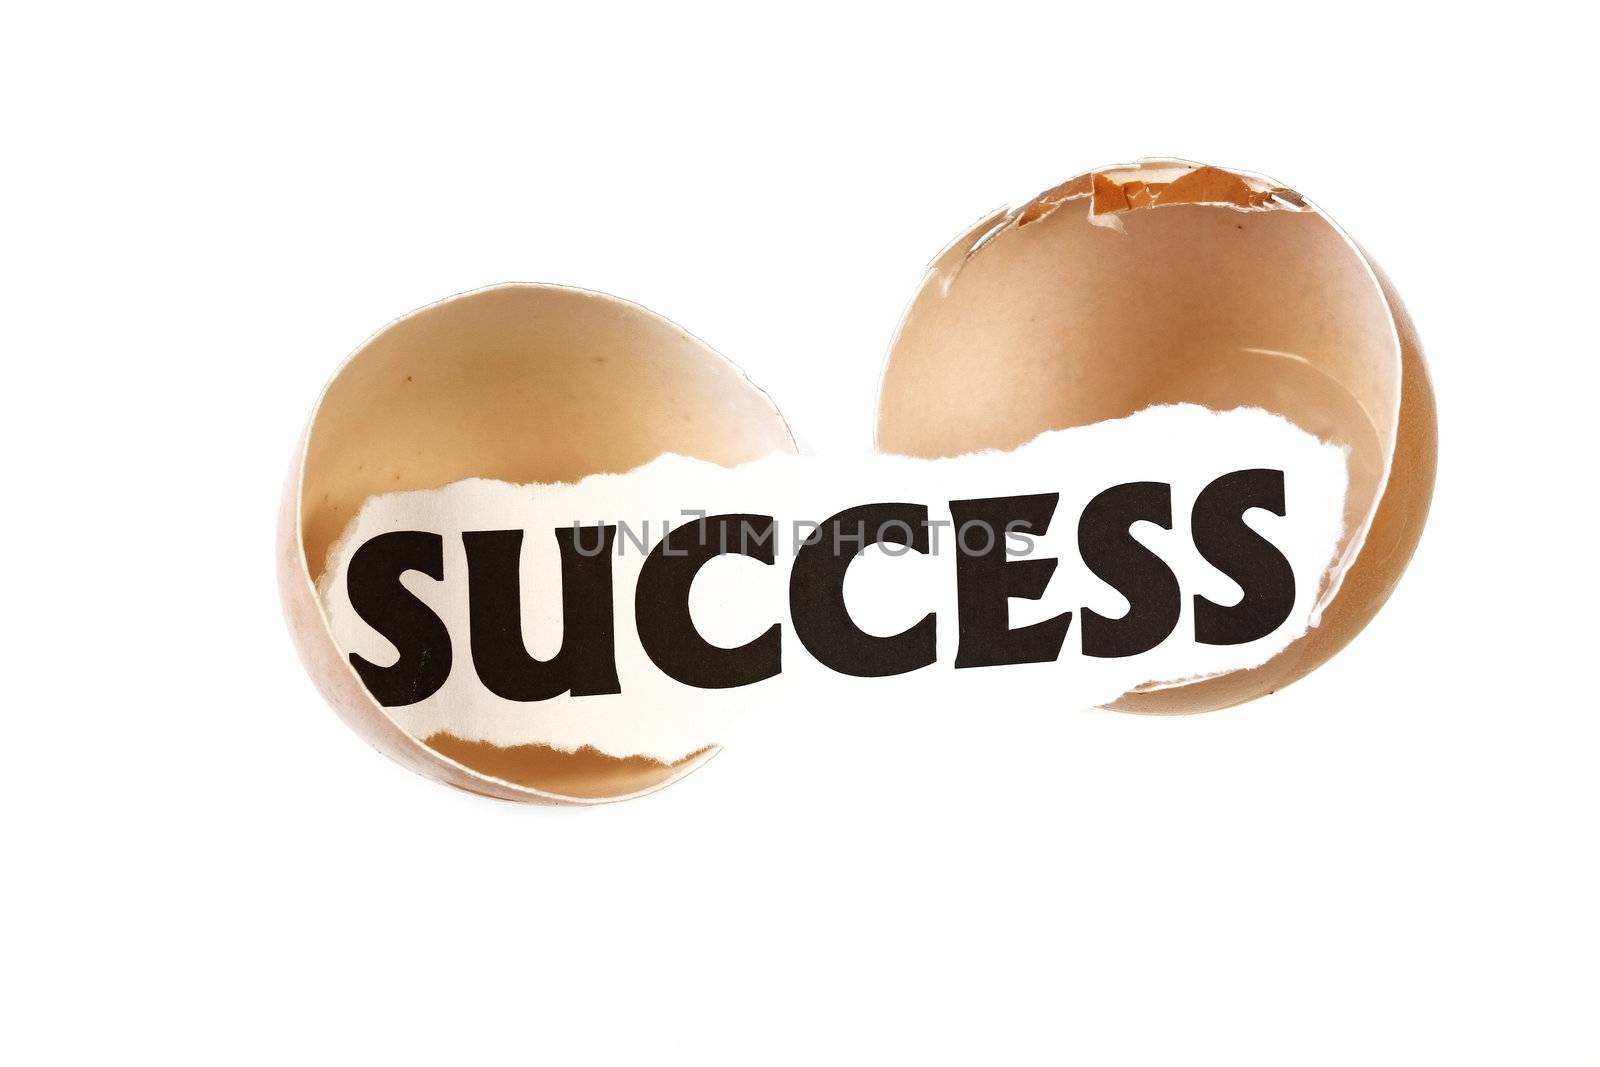 shell egg on white background with the word success
